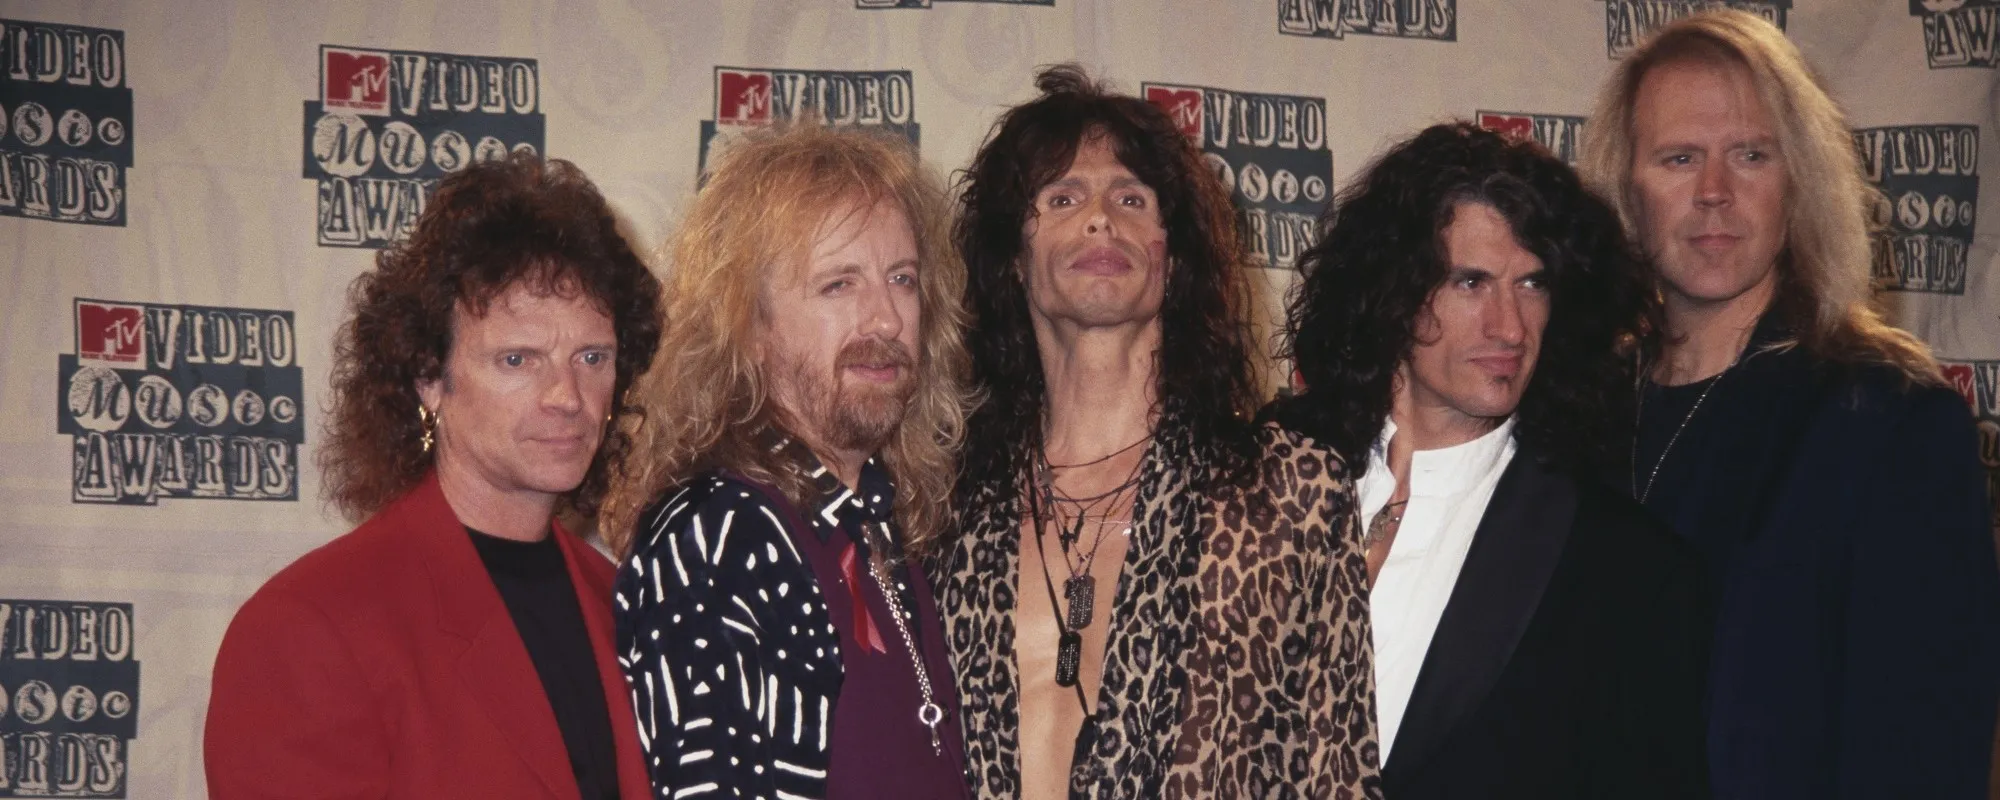 On This Day in 1993: Aerosmith Scored Their First No. 1 Album on the ‘Billboard’ 200 with ‘Get a Grip’